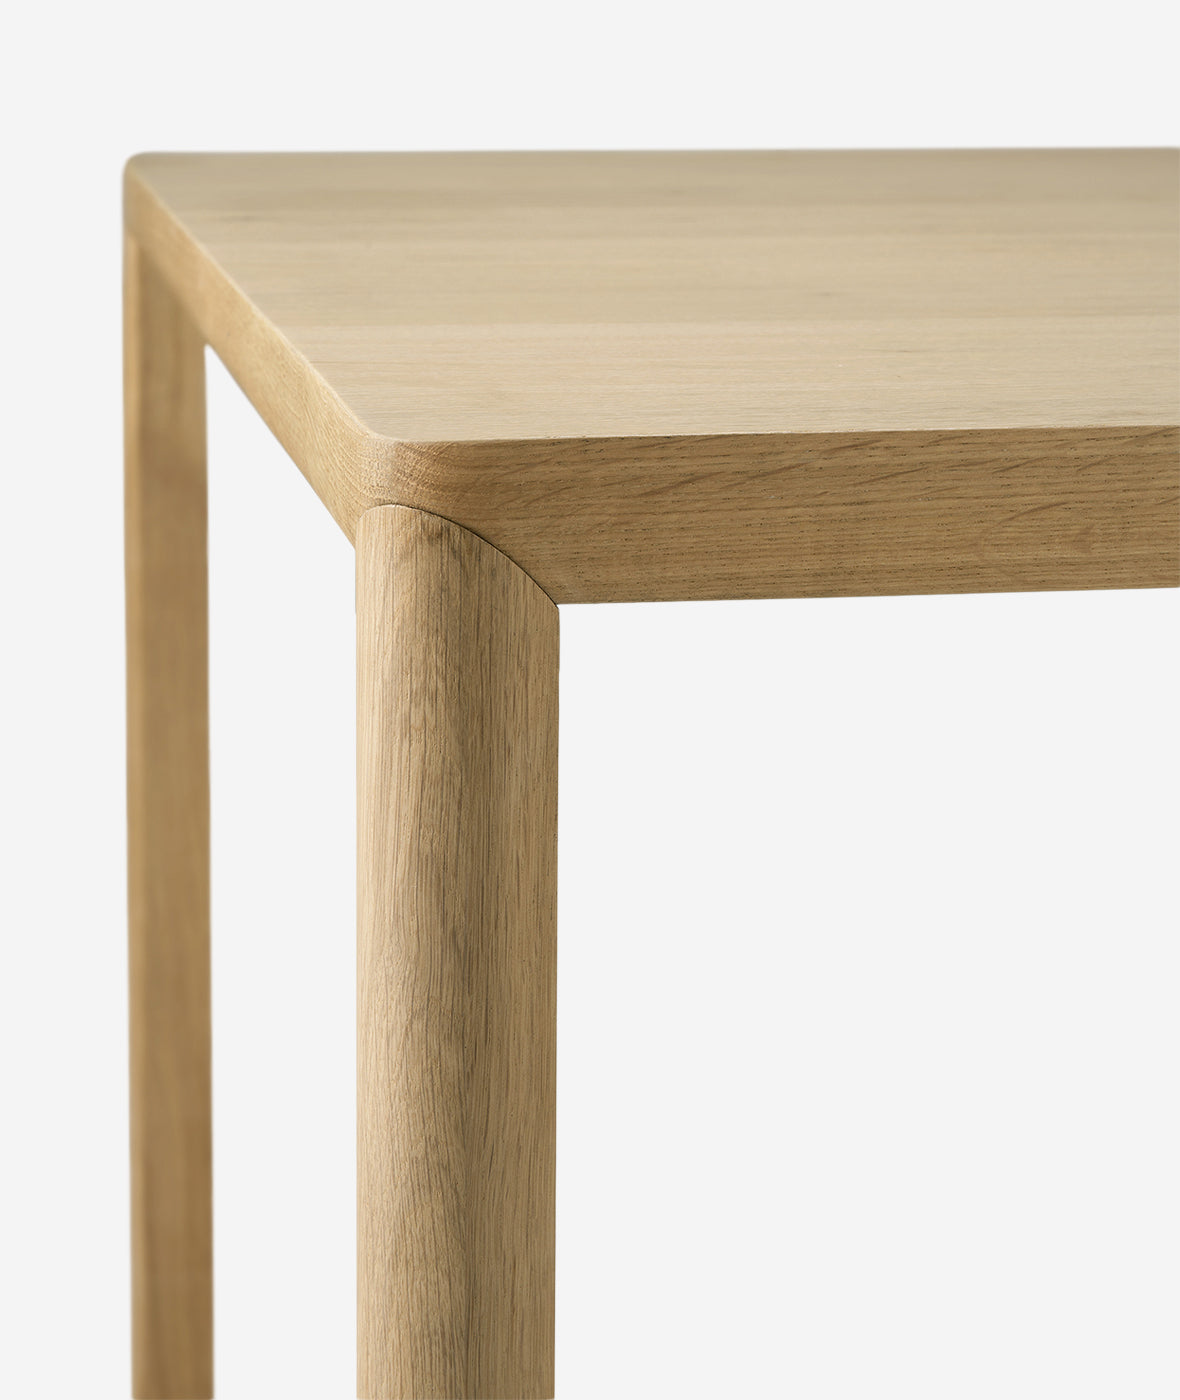 Oak Air Dining Table - More Options